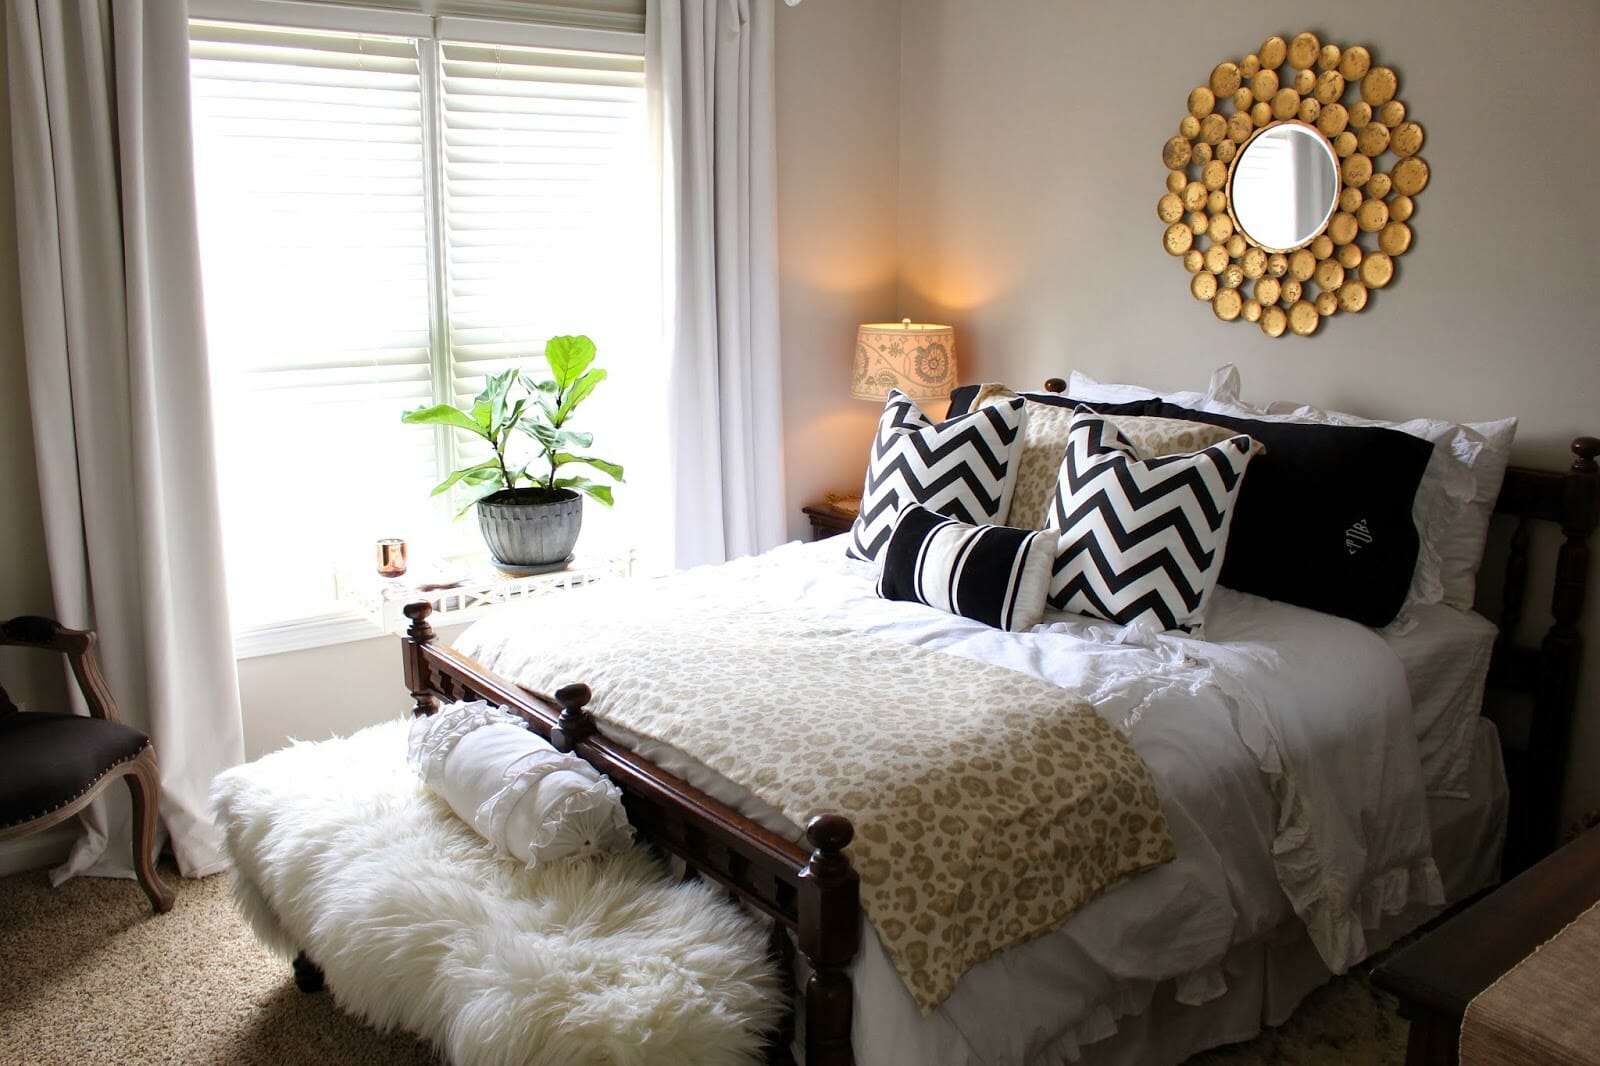  Small Space Guest Bedroom Ideas for Living room